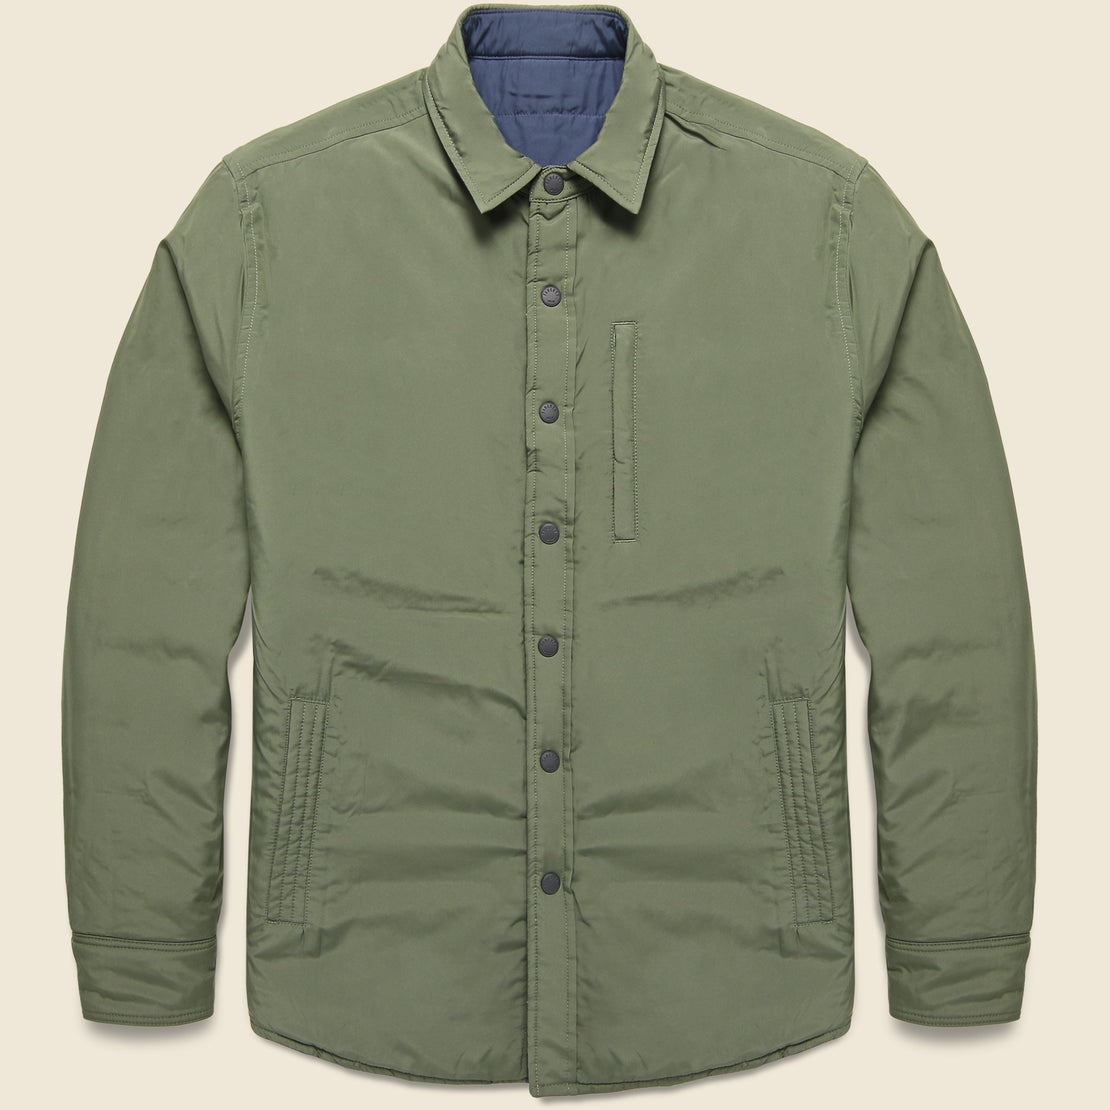 Atmosphere Reversible Shirt Jacket - Olive/Navy - Faherty - STAG Provisions - Outerwear - Shirt Jacket